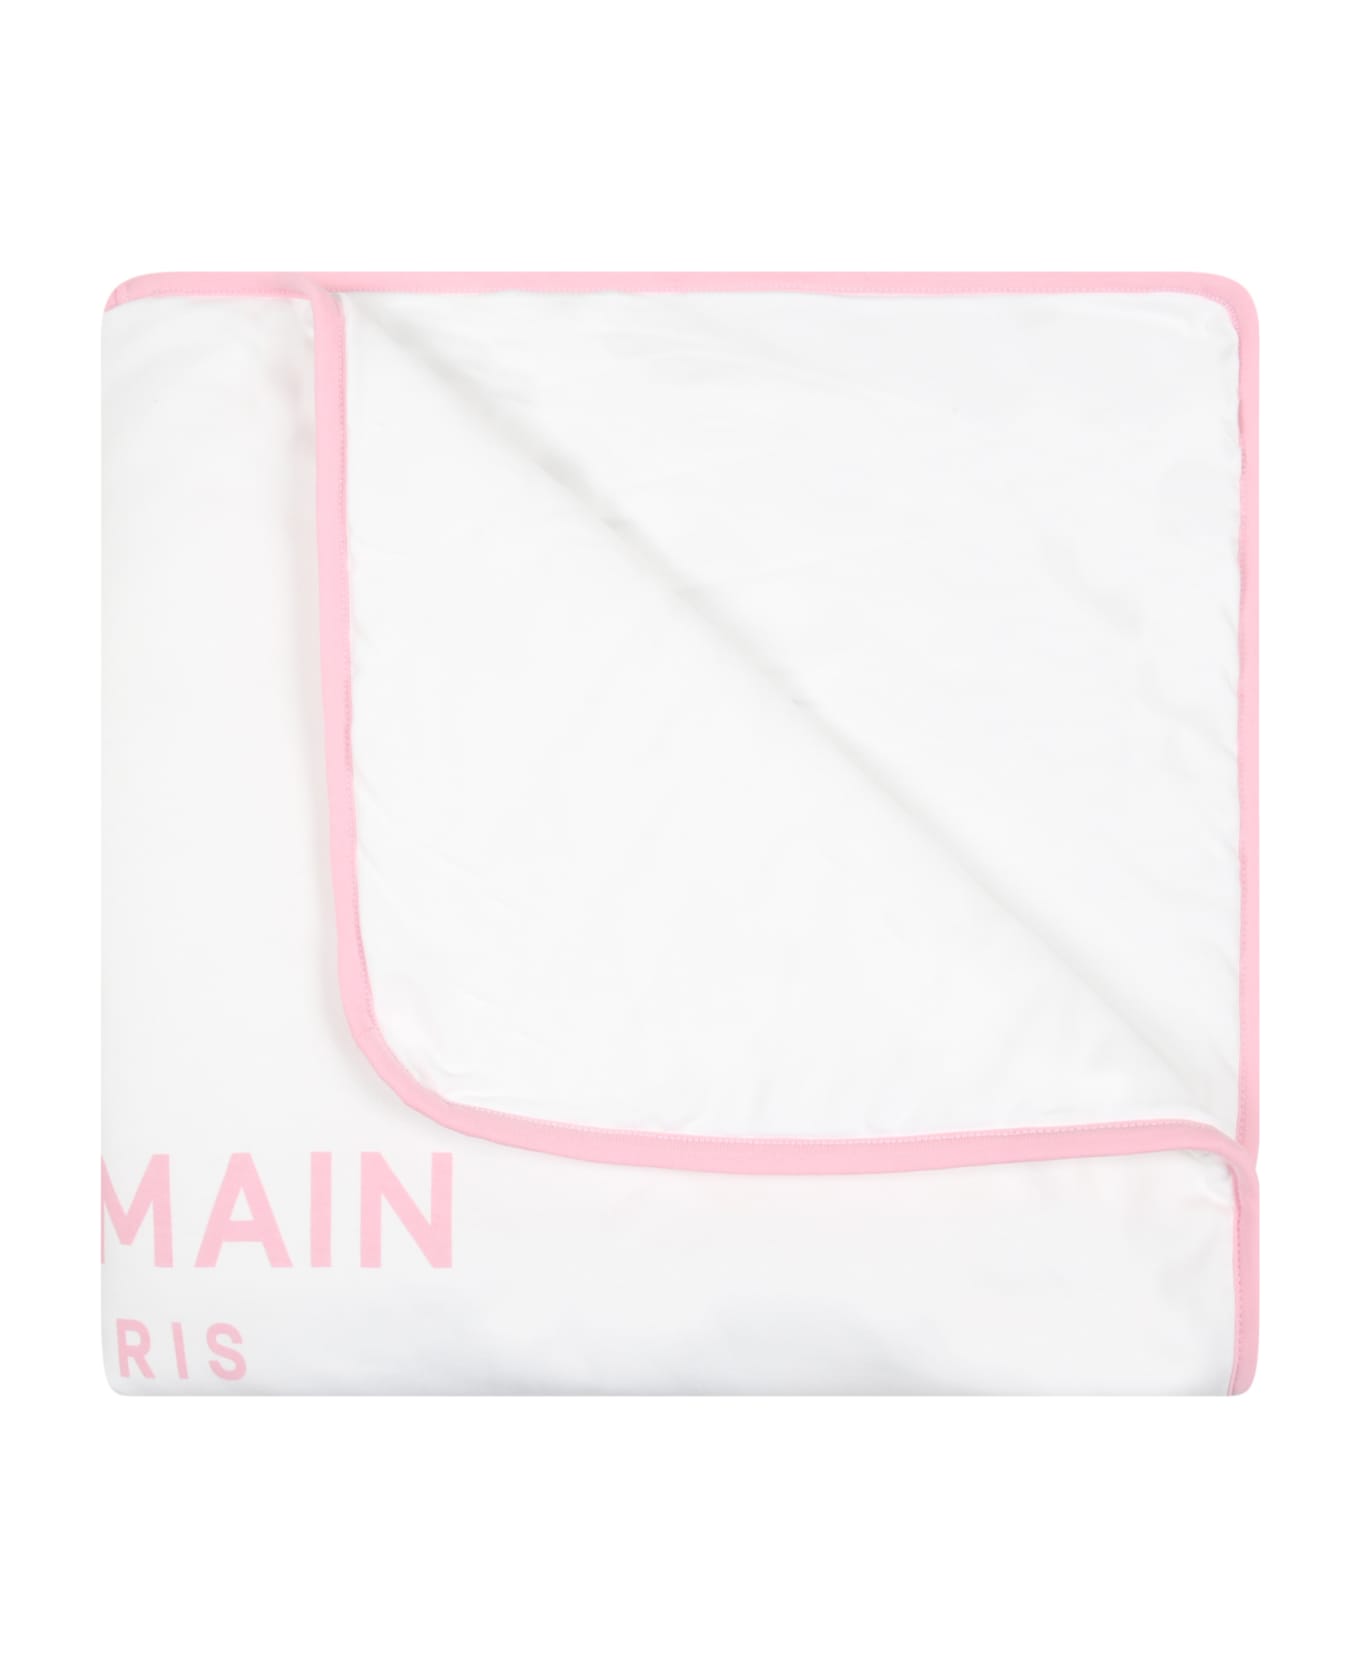 Balmain Boots White Blanket For Baby Girl With Pink Logo - White